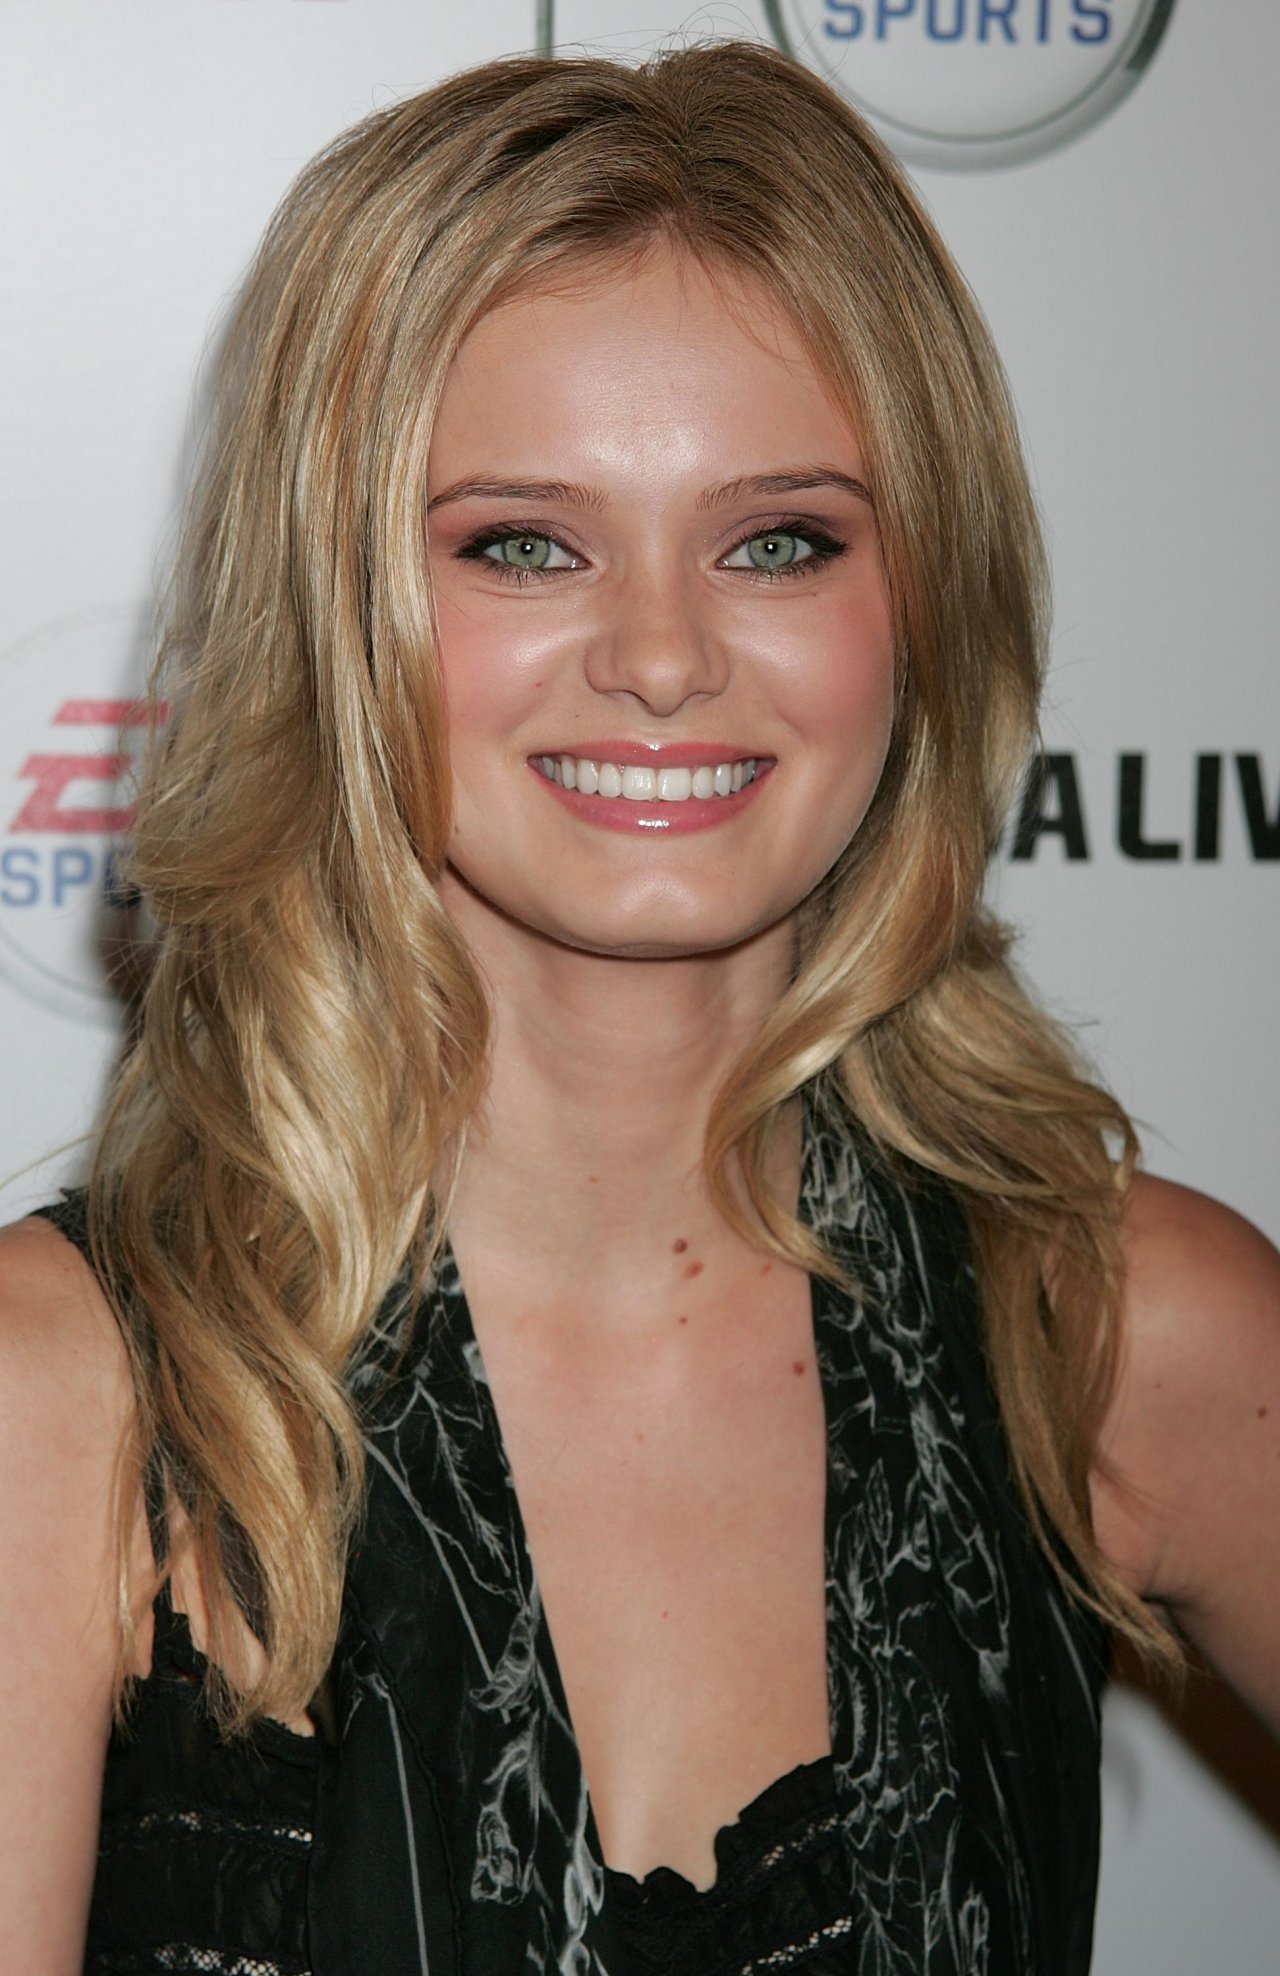 Sara Paxton leaked wallpapers